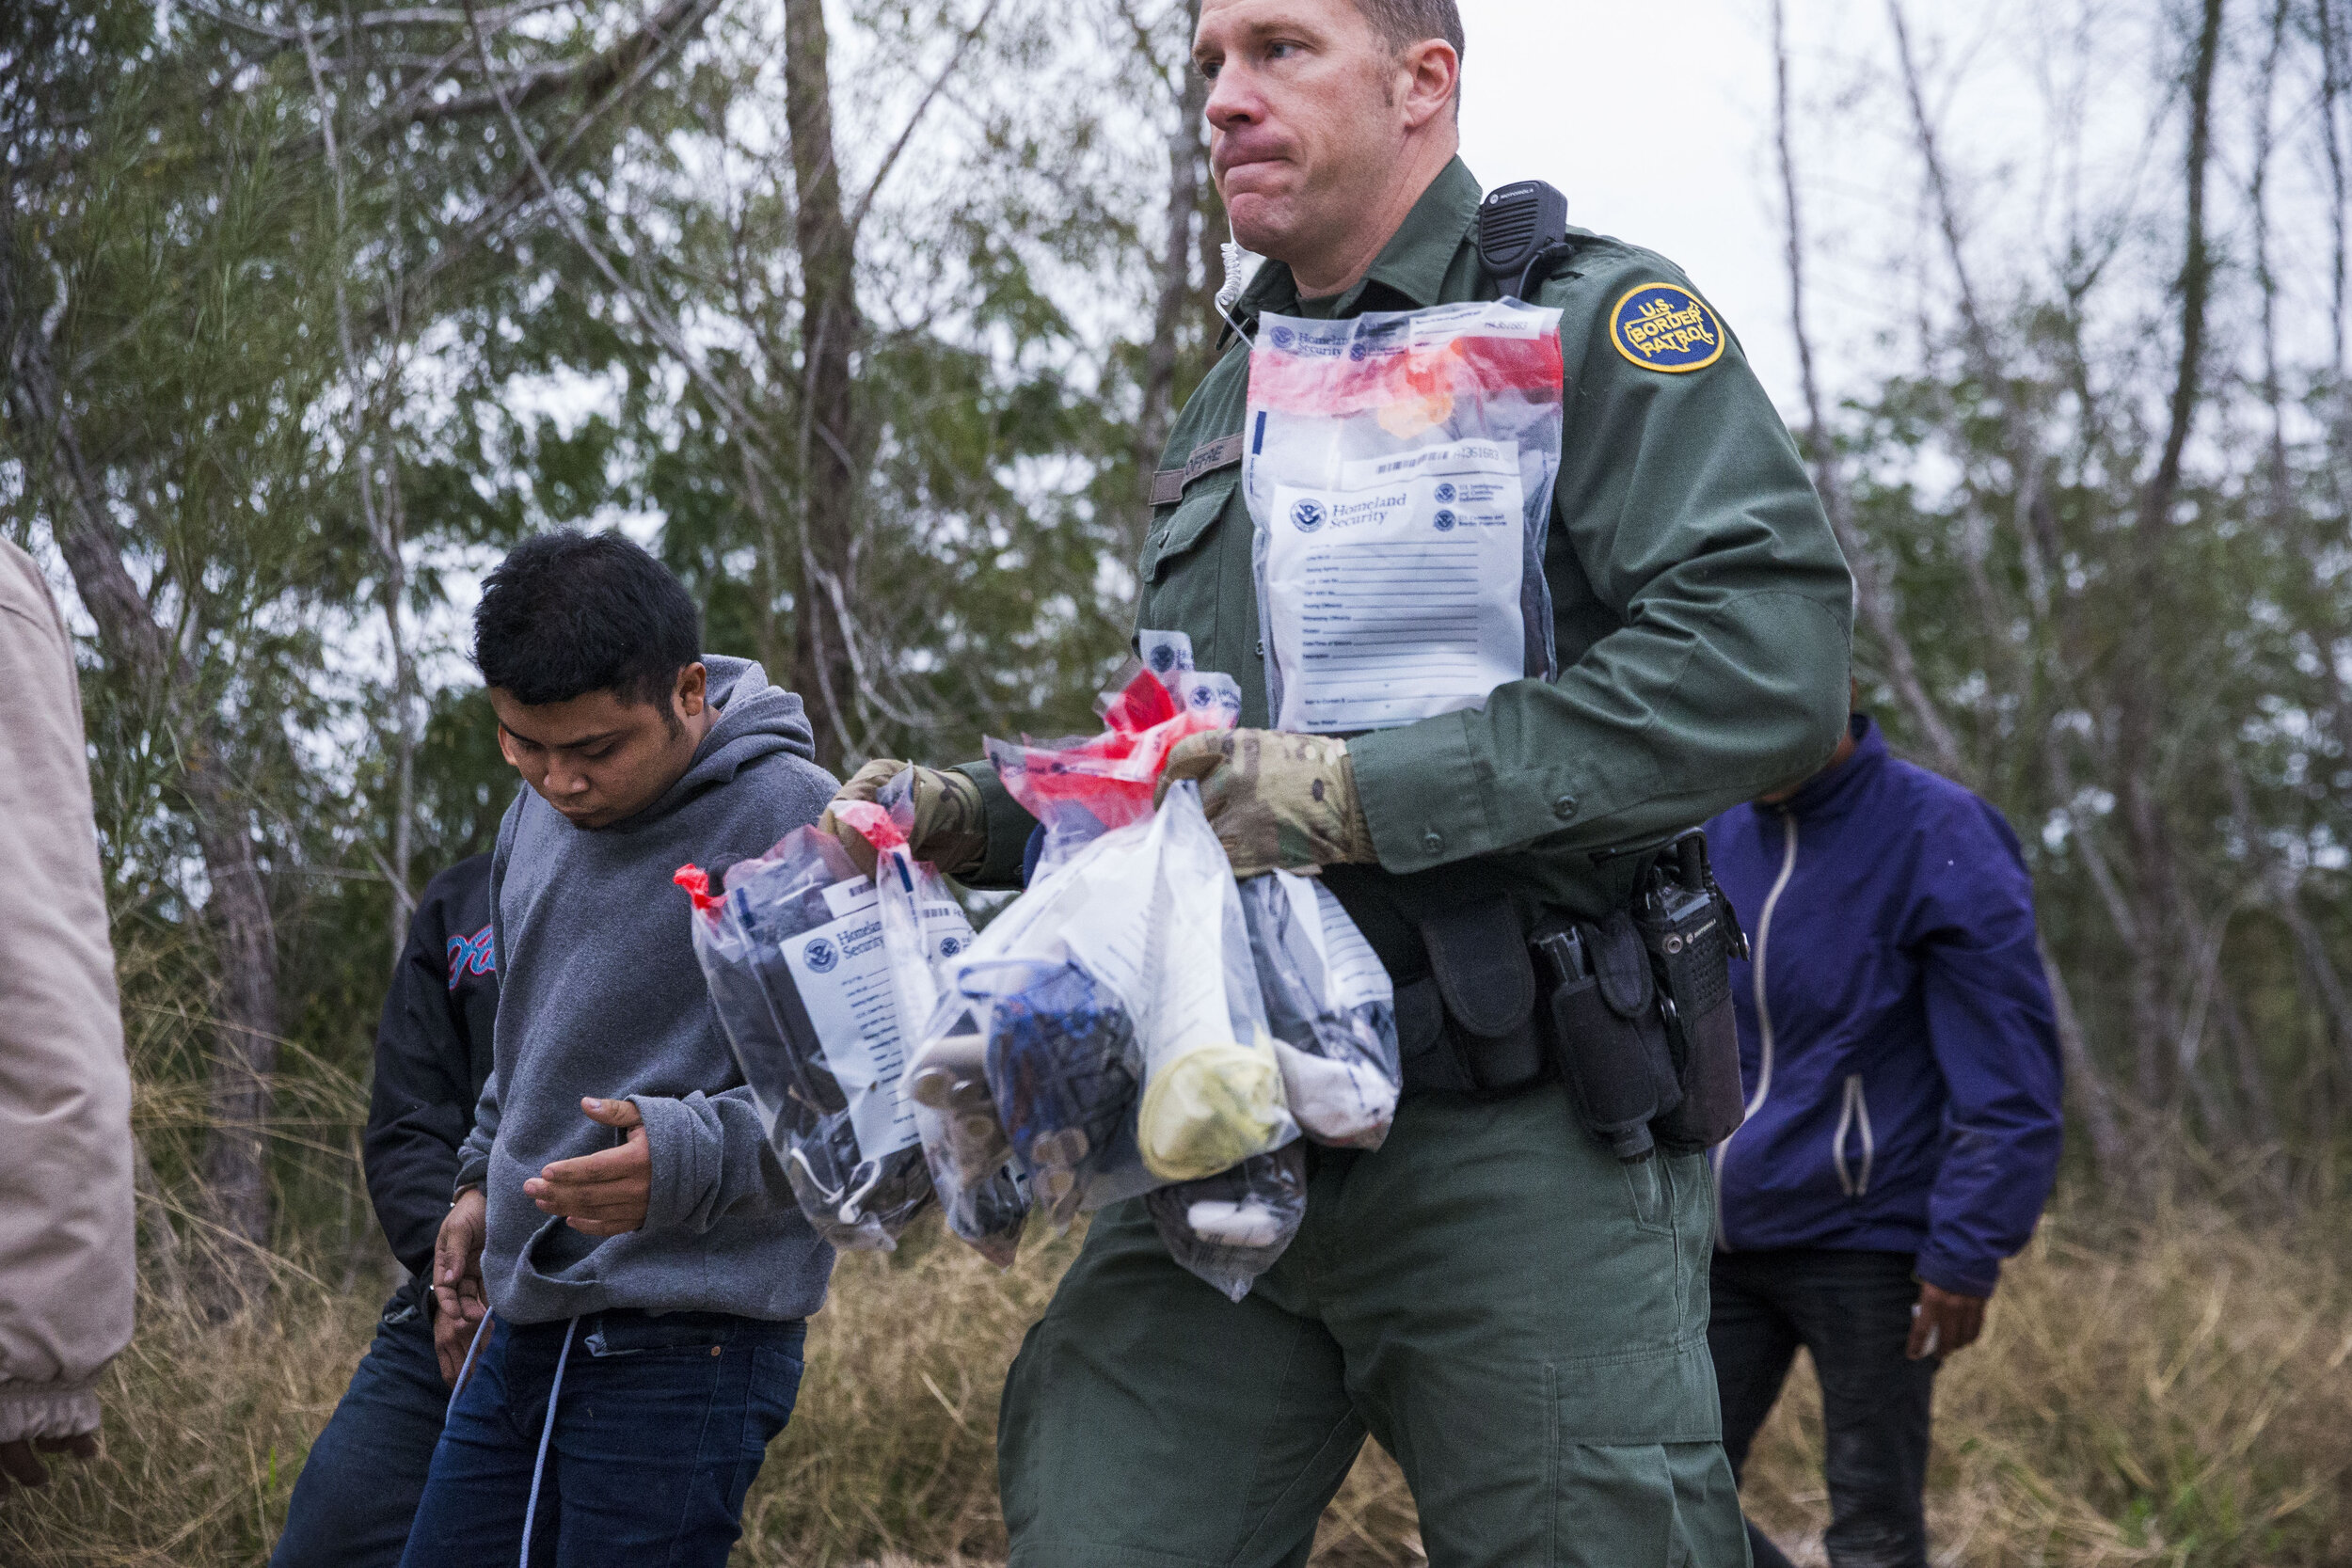  Border Patrol Agent Mark Joffre carries the belongings of a group of immigrants suspected of illegally crossing the border from Mexico into the U.S., while they were being taken into custody on Wednesday, Dec. 5, 2018, near McAllen, TX.   [Amanda Vo